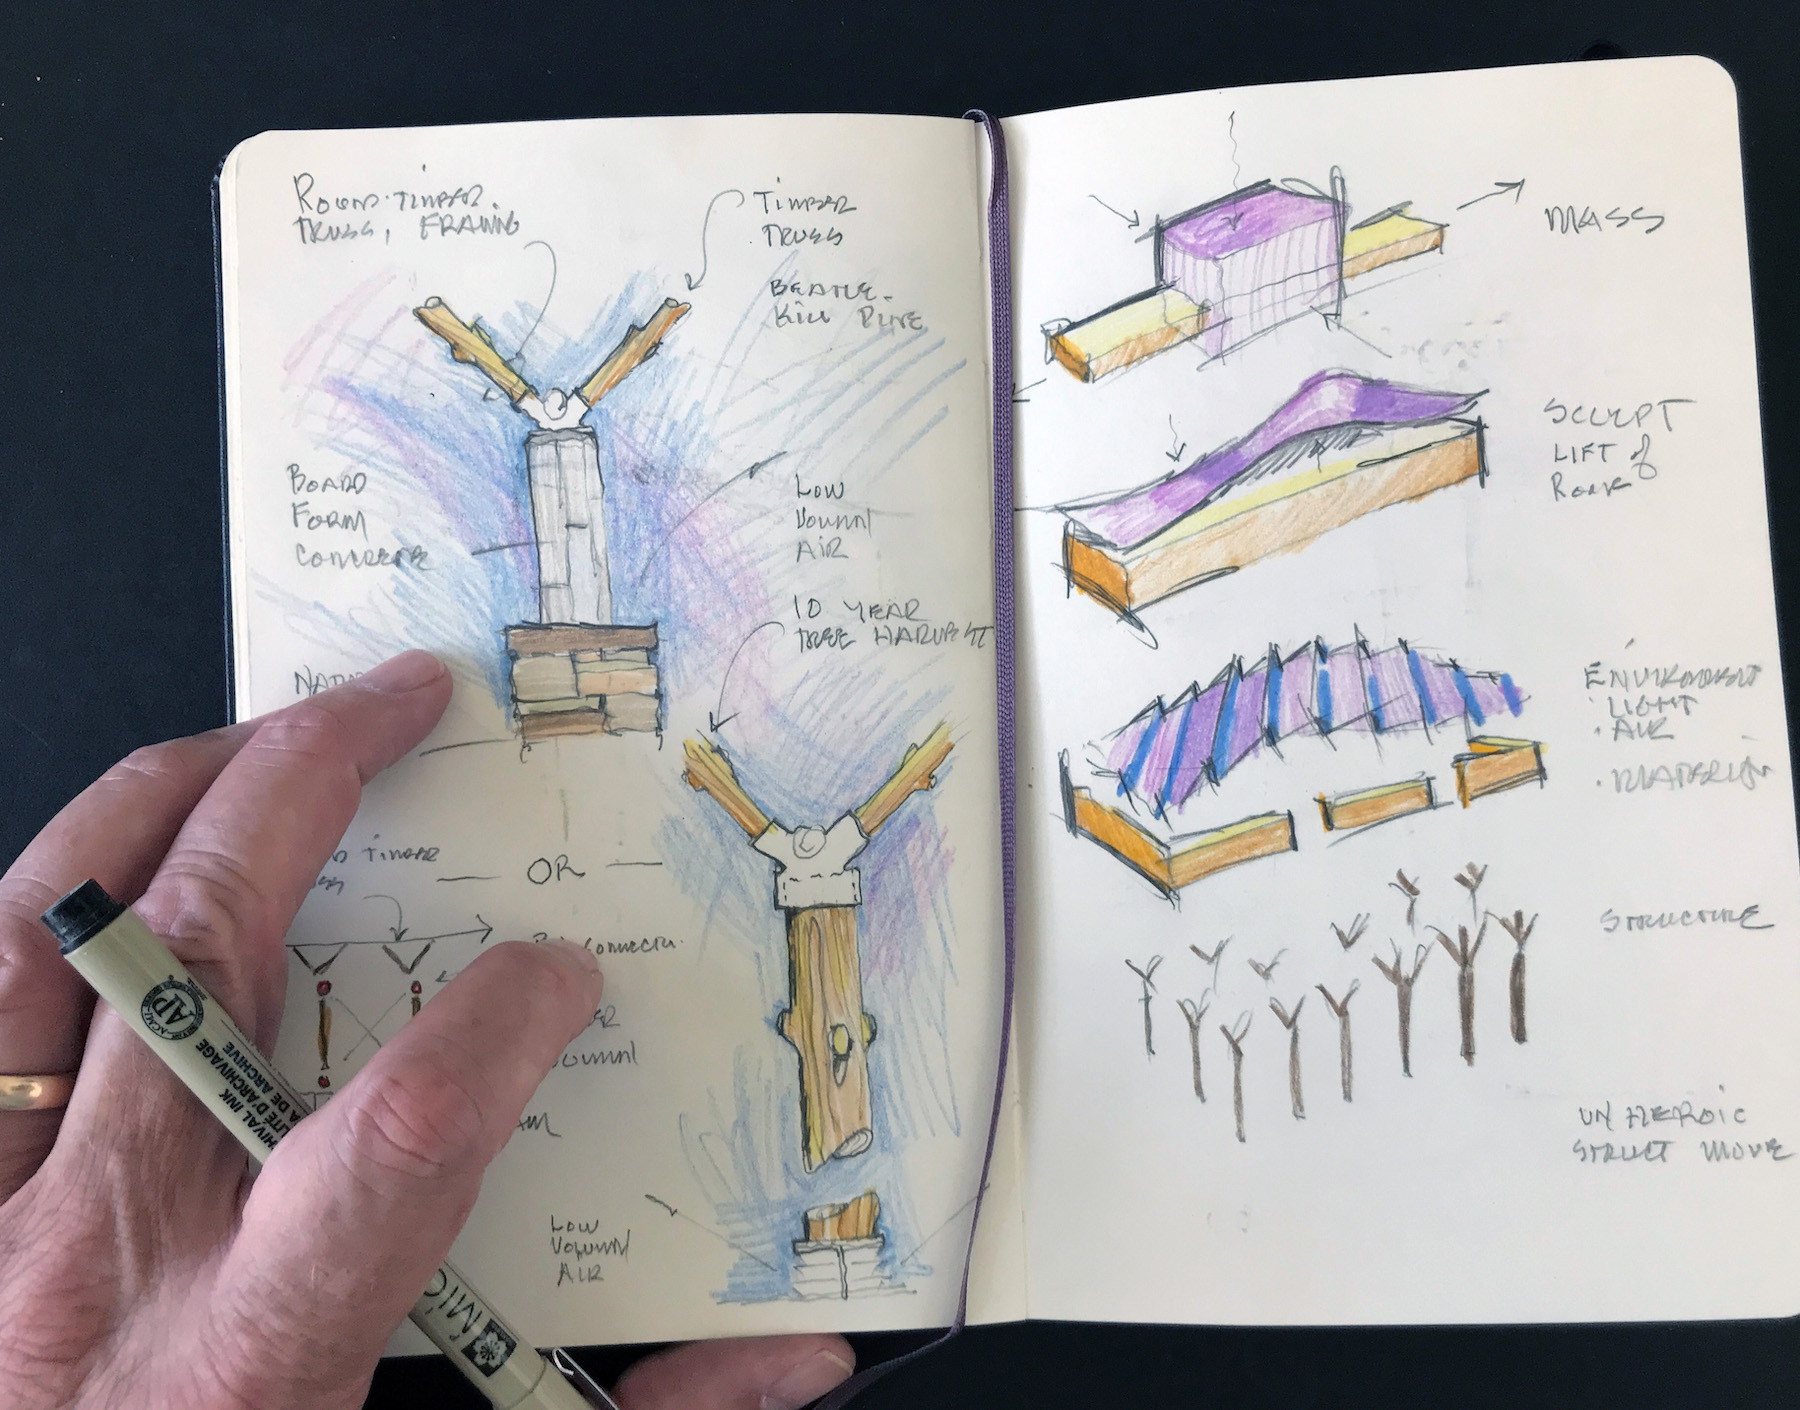 Keep your sketchbook close by to capture design intent and detail.